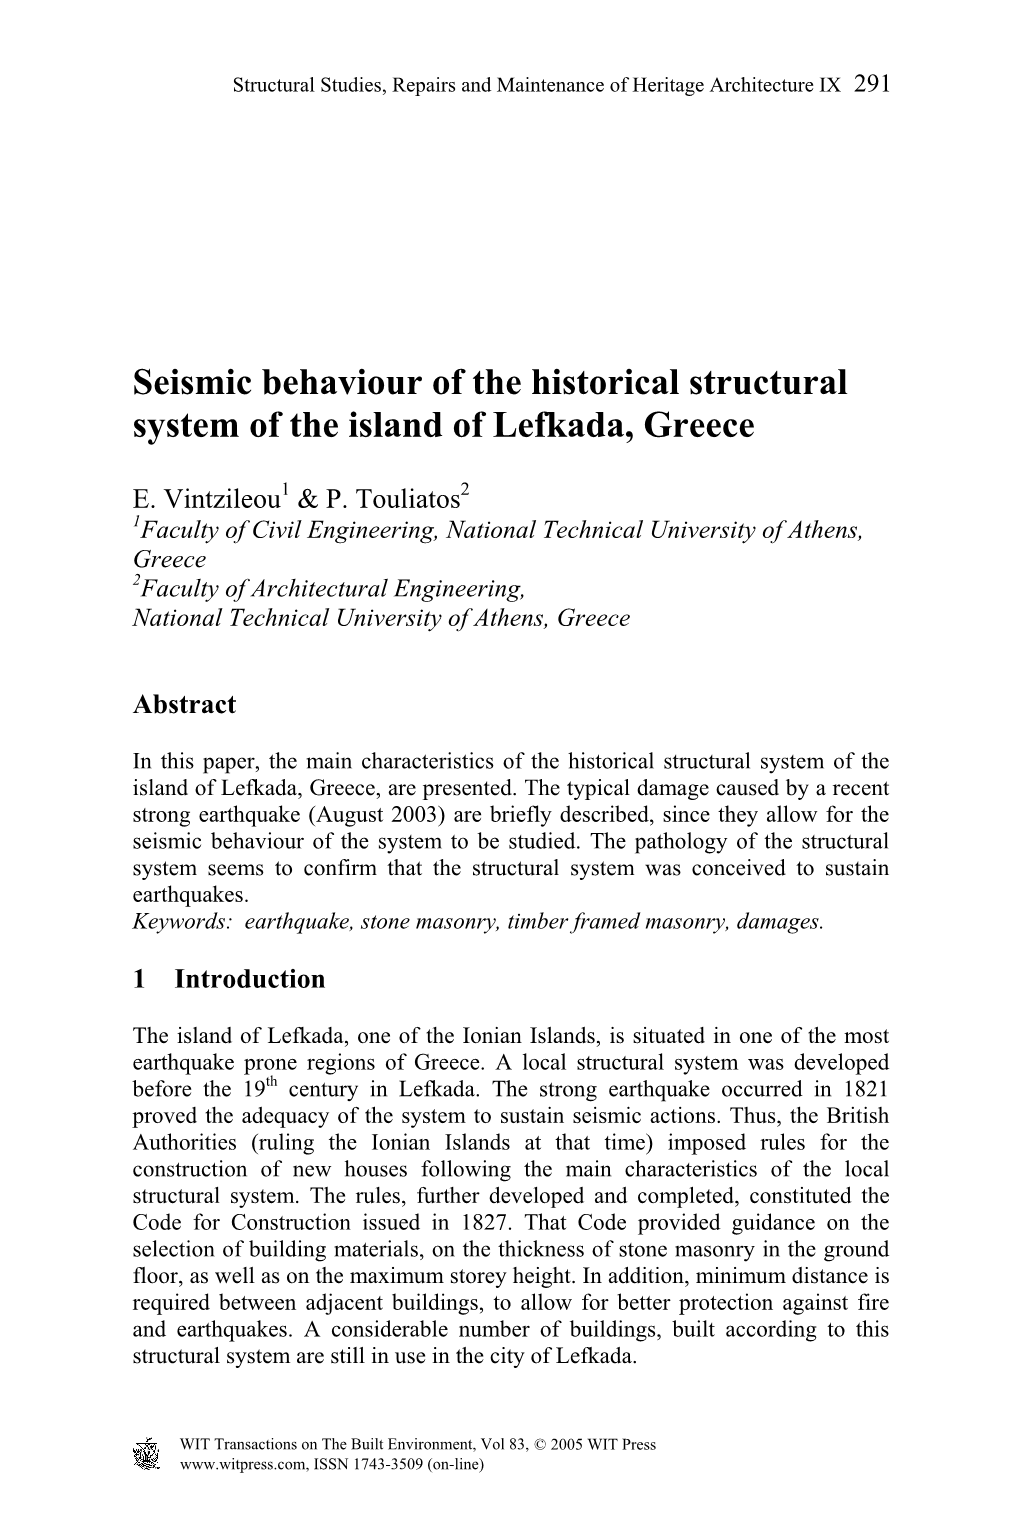 Seismic Behaviour of the Historical Structural System of the Island of Lefkada, Greece